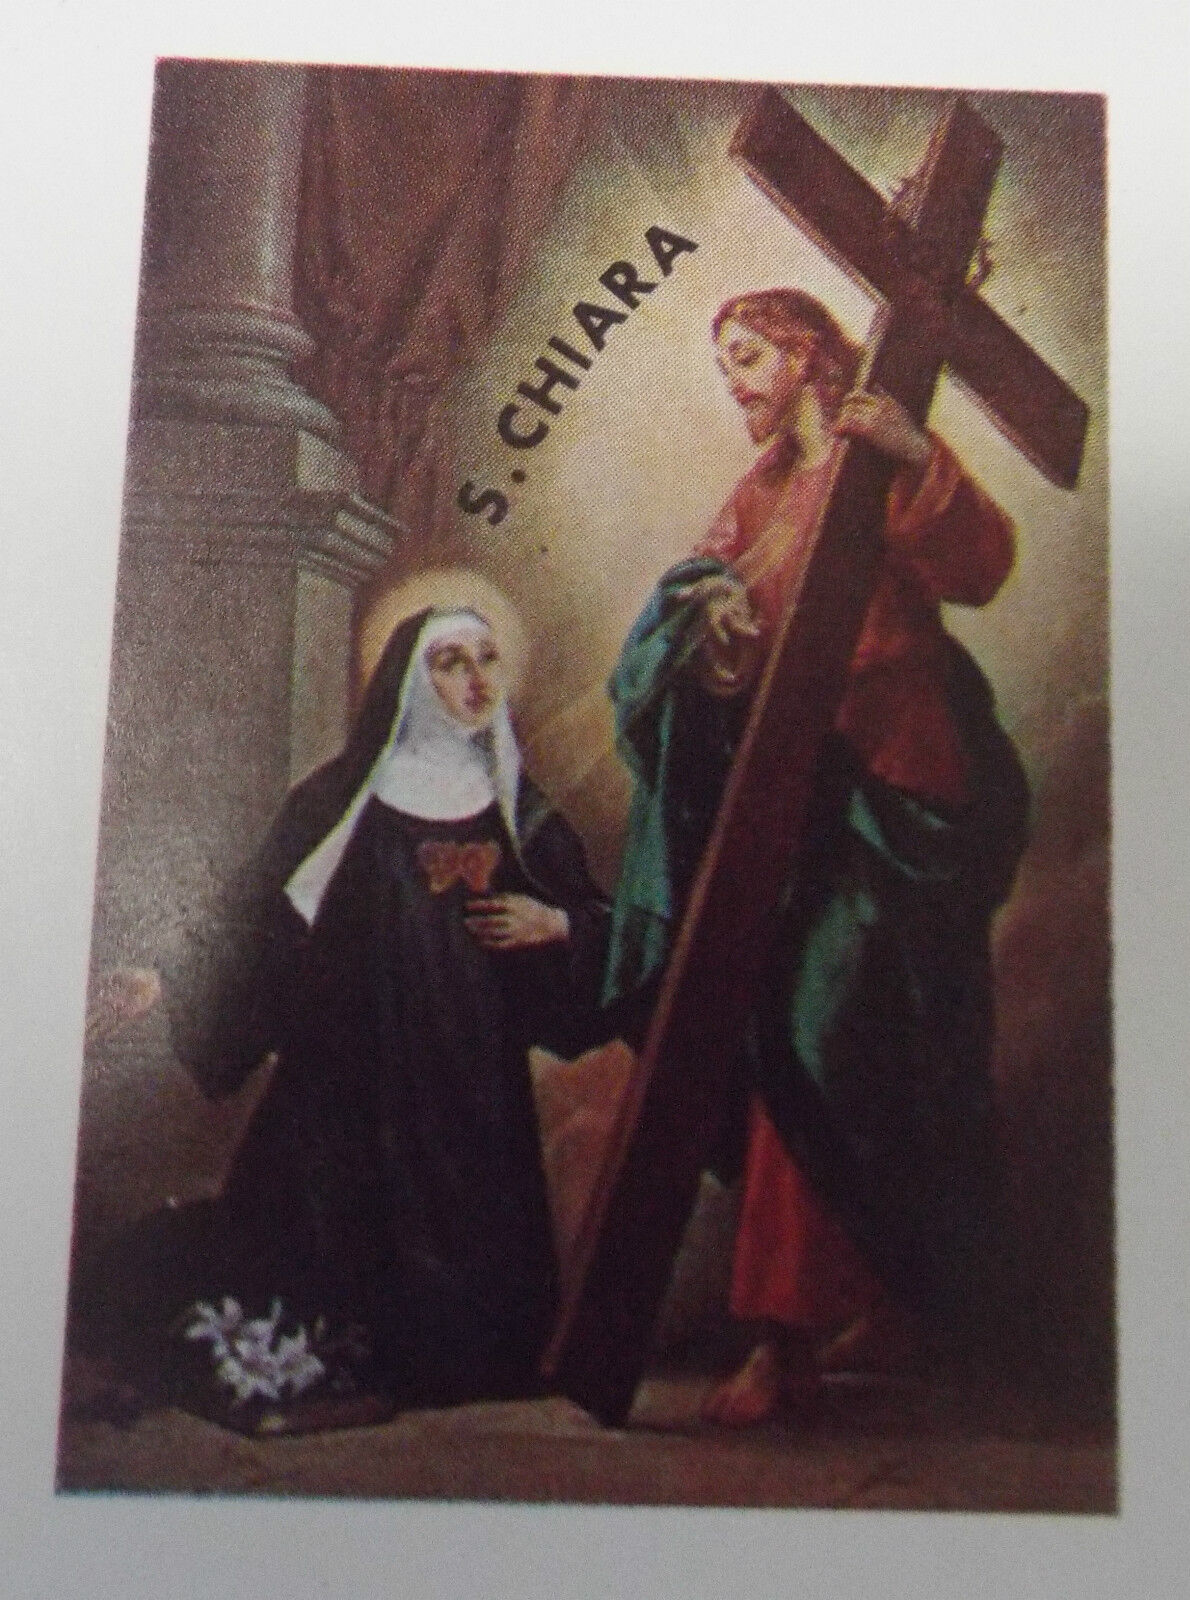 Saint Clare of Montefalco Image/Print, New from Italy - Bob and Penny Lord